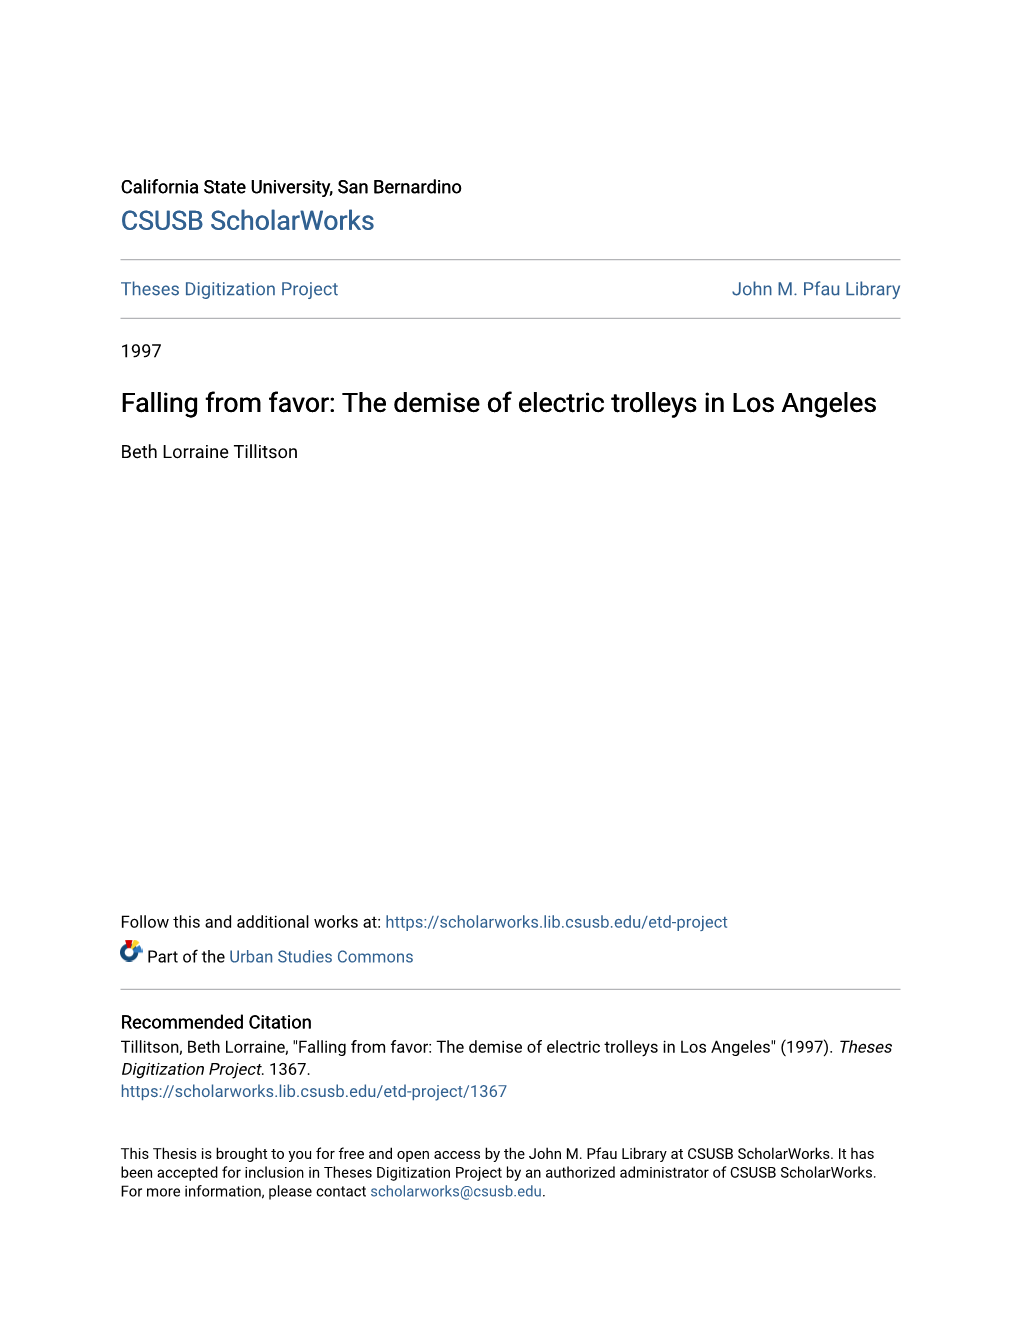 Falling from Favor: the Demise of Electric Trolleys in Los Angeles